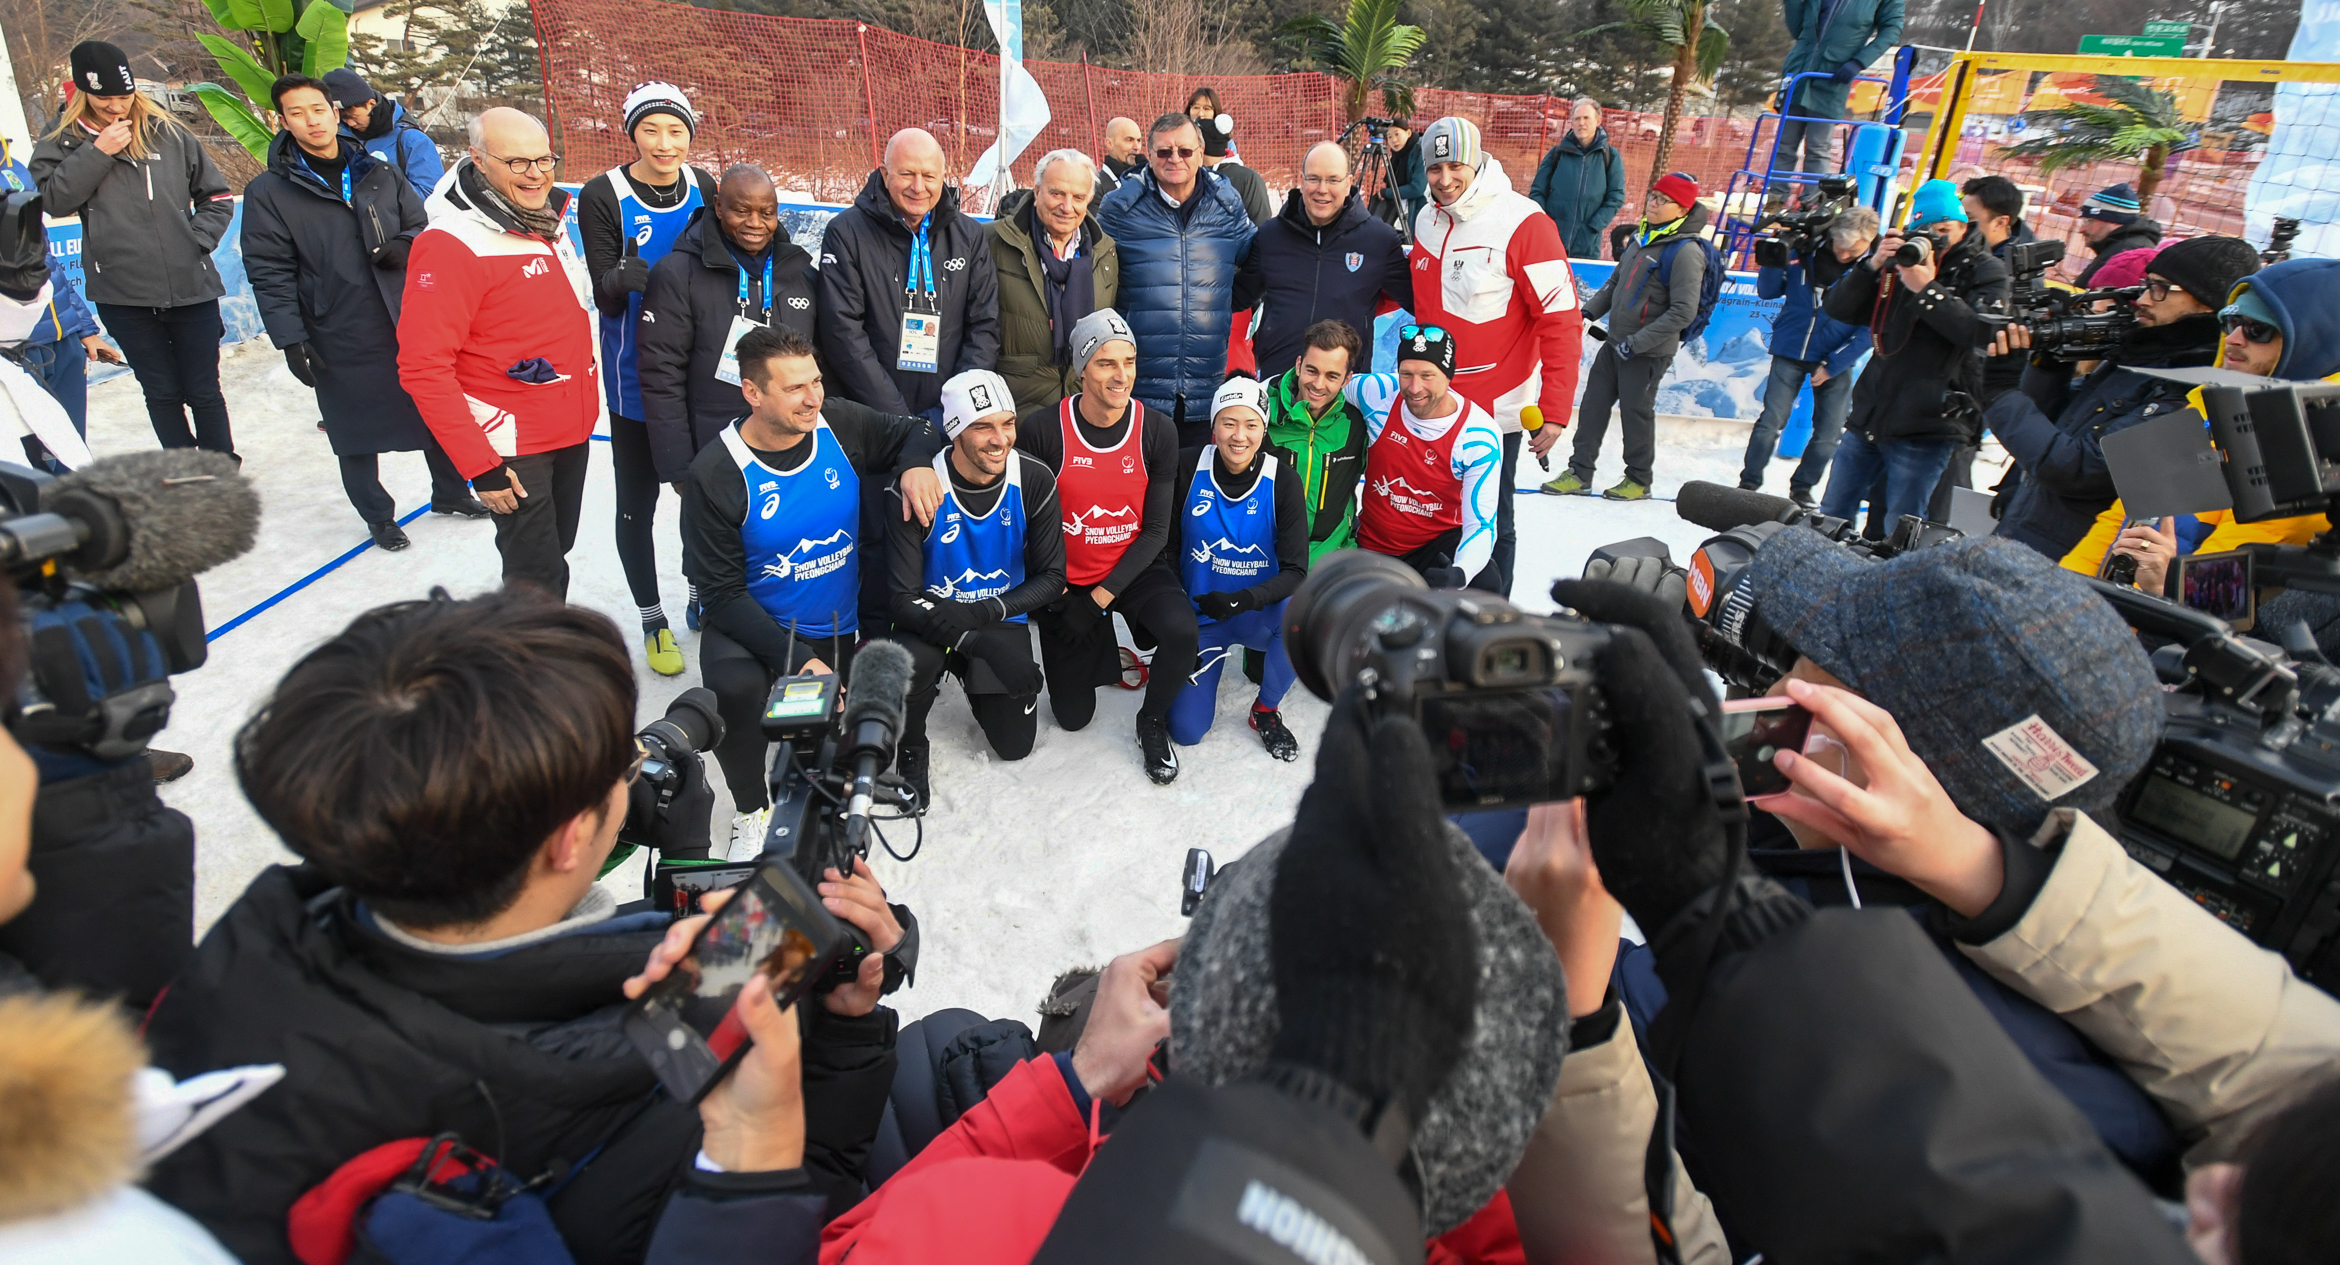 SNOW VOLLEYBALL FESTIVAL COMING TO LAUSANNE IN 2020 Asian Volleyball